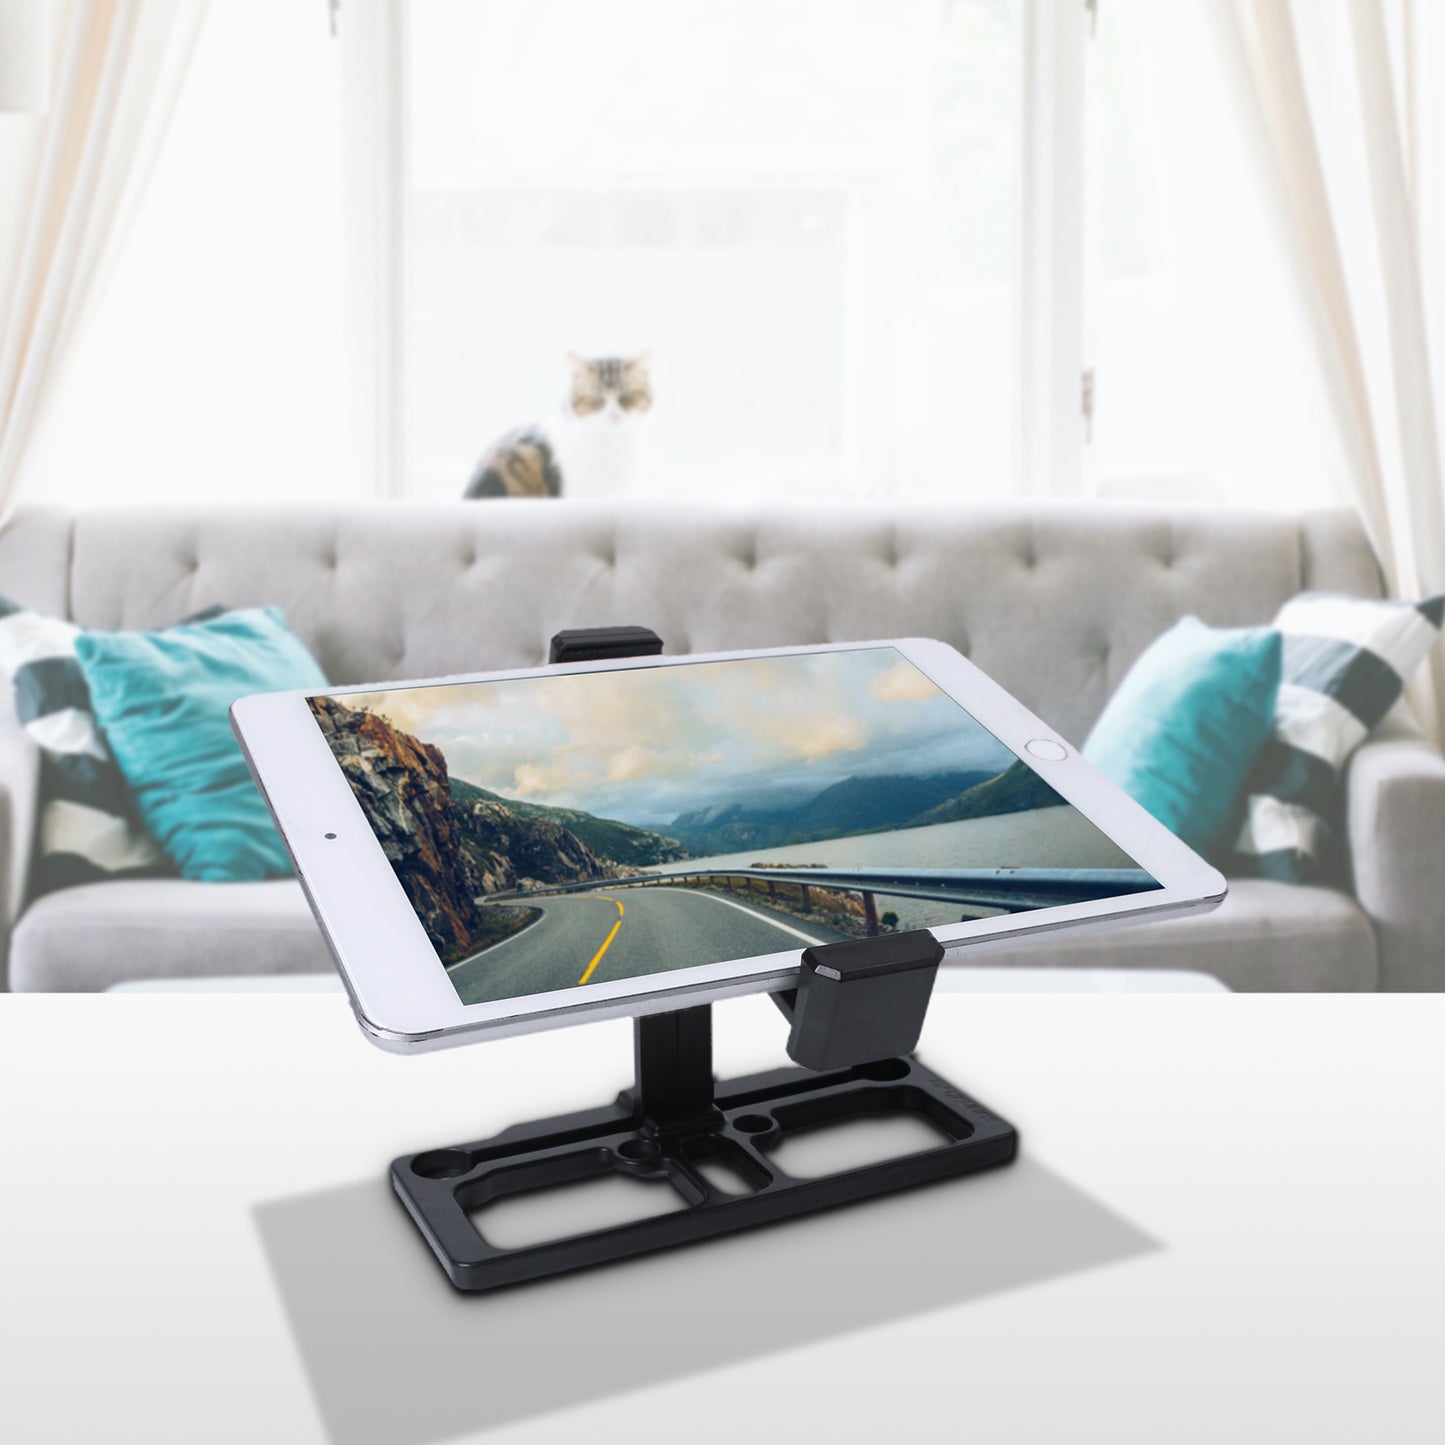 Feimi Remote Control Mobile Phone Tablet Holder